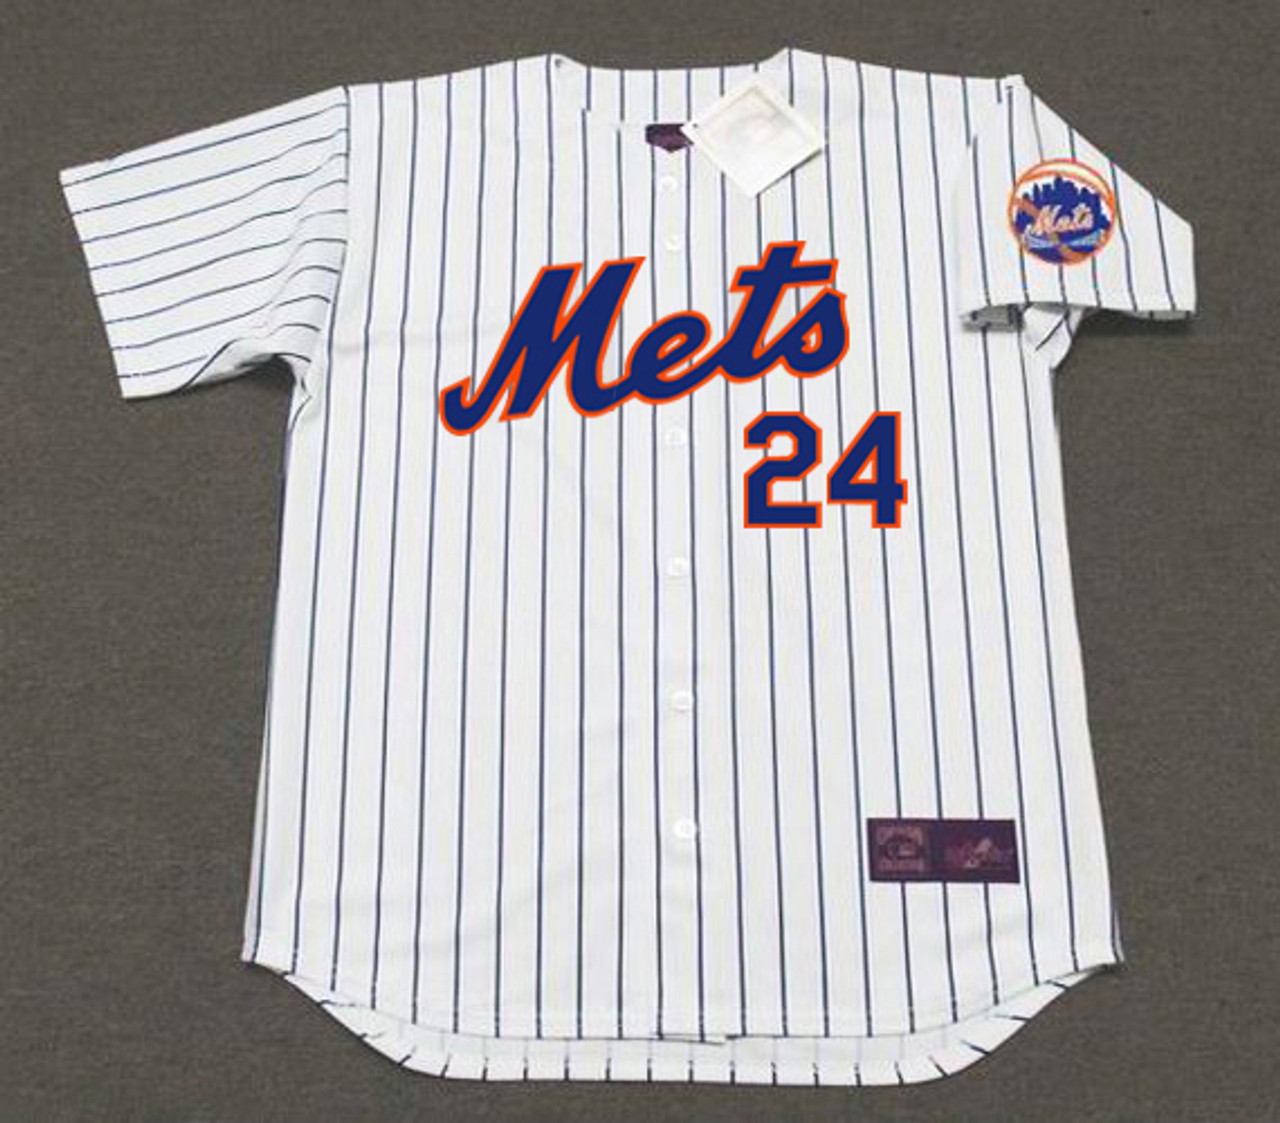 Art Shamsky #24 - White Pinstripe Jersey - 50th Anniversary of the 1969 Mets  - Worn On-Field during the Pre-Game Ceremony - 6/29/2019